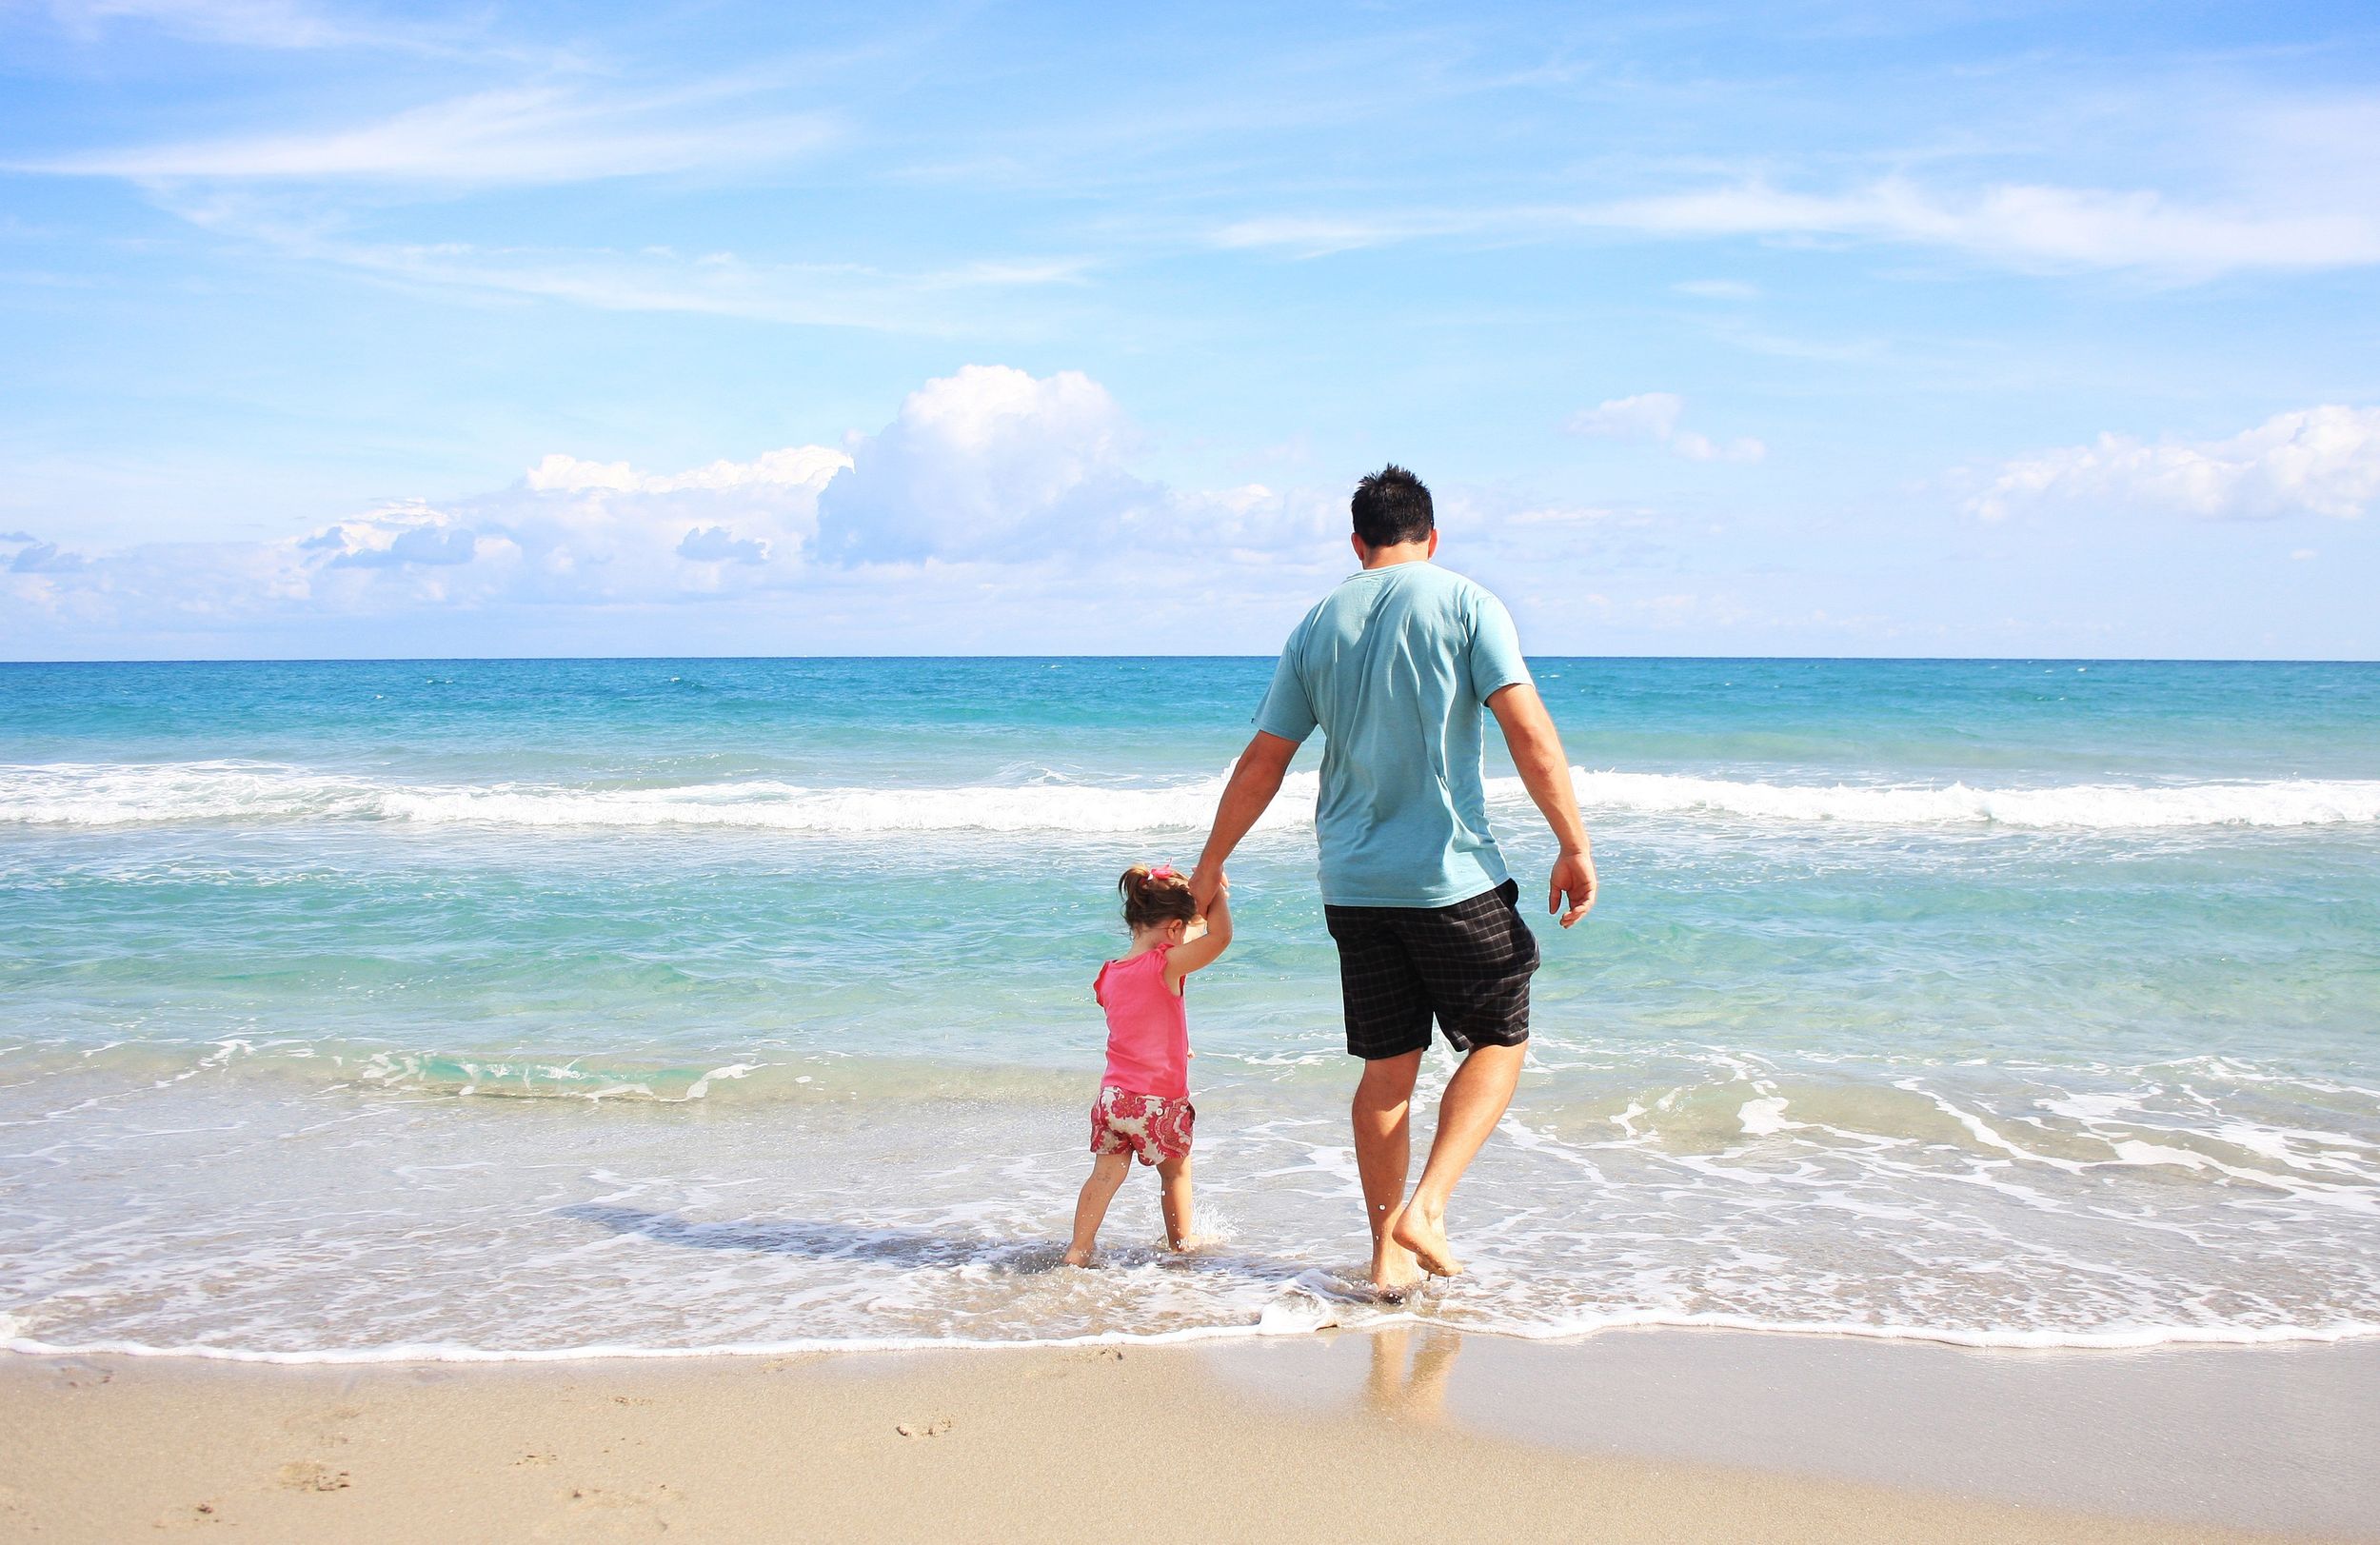 Father and daught walk hand-in-hand on the beach.